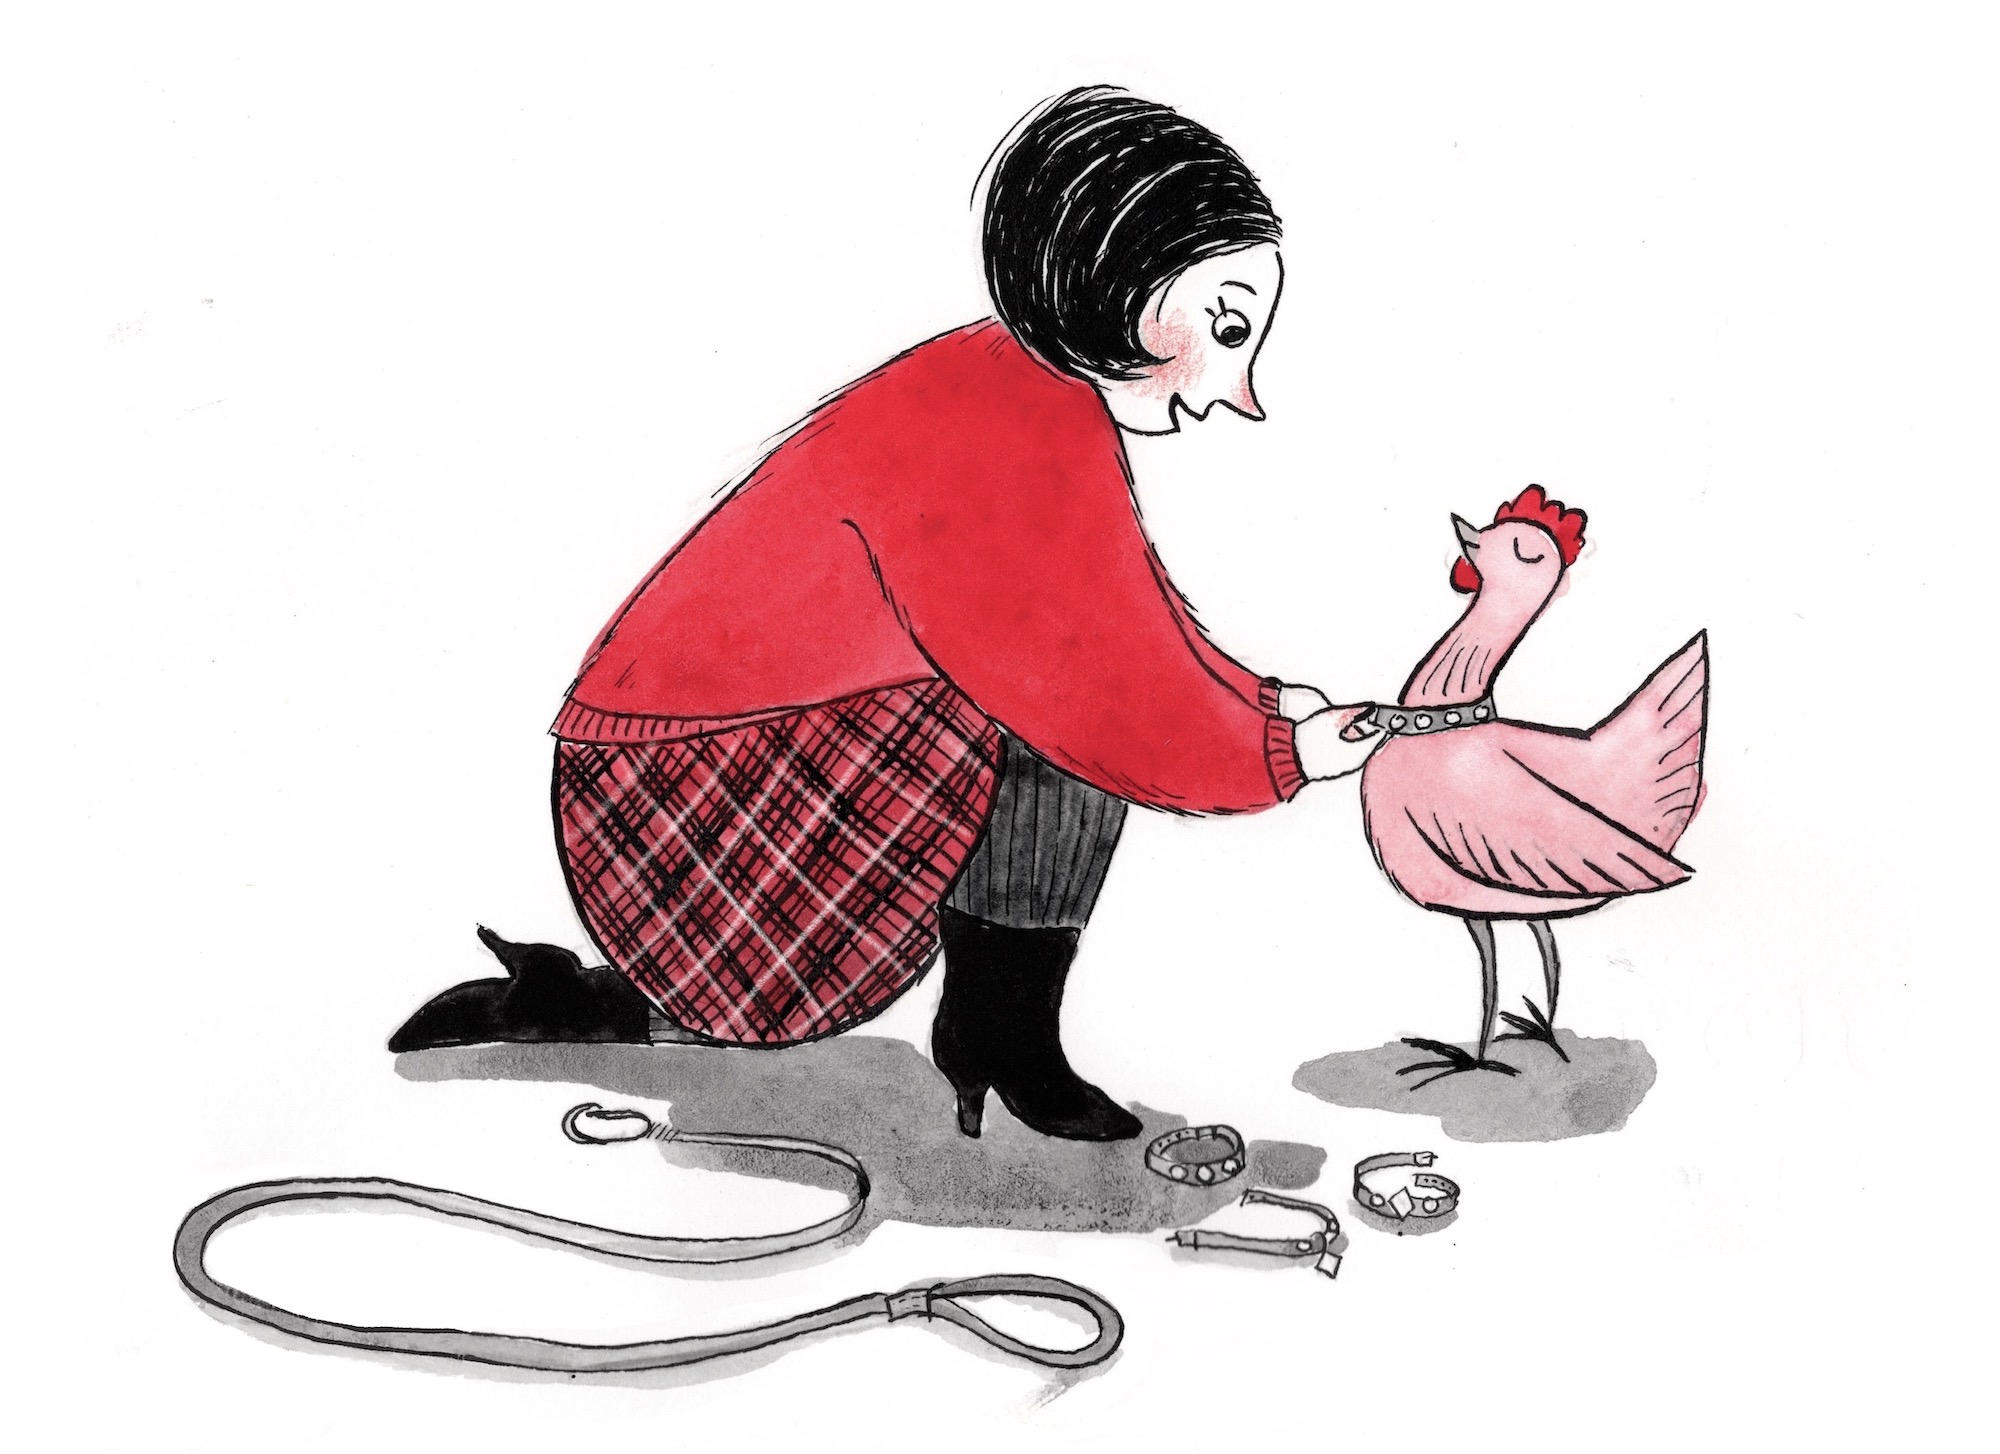 Black and white and red illustration of a woman putting a collar on a chicken, like she is getting ready to take her for a walk. There is a leash at their feet.